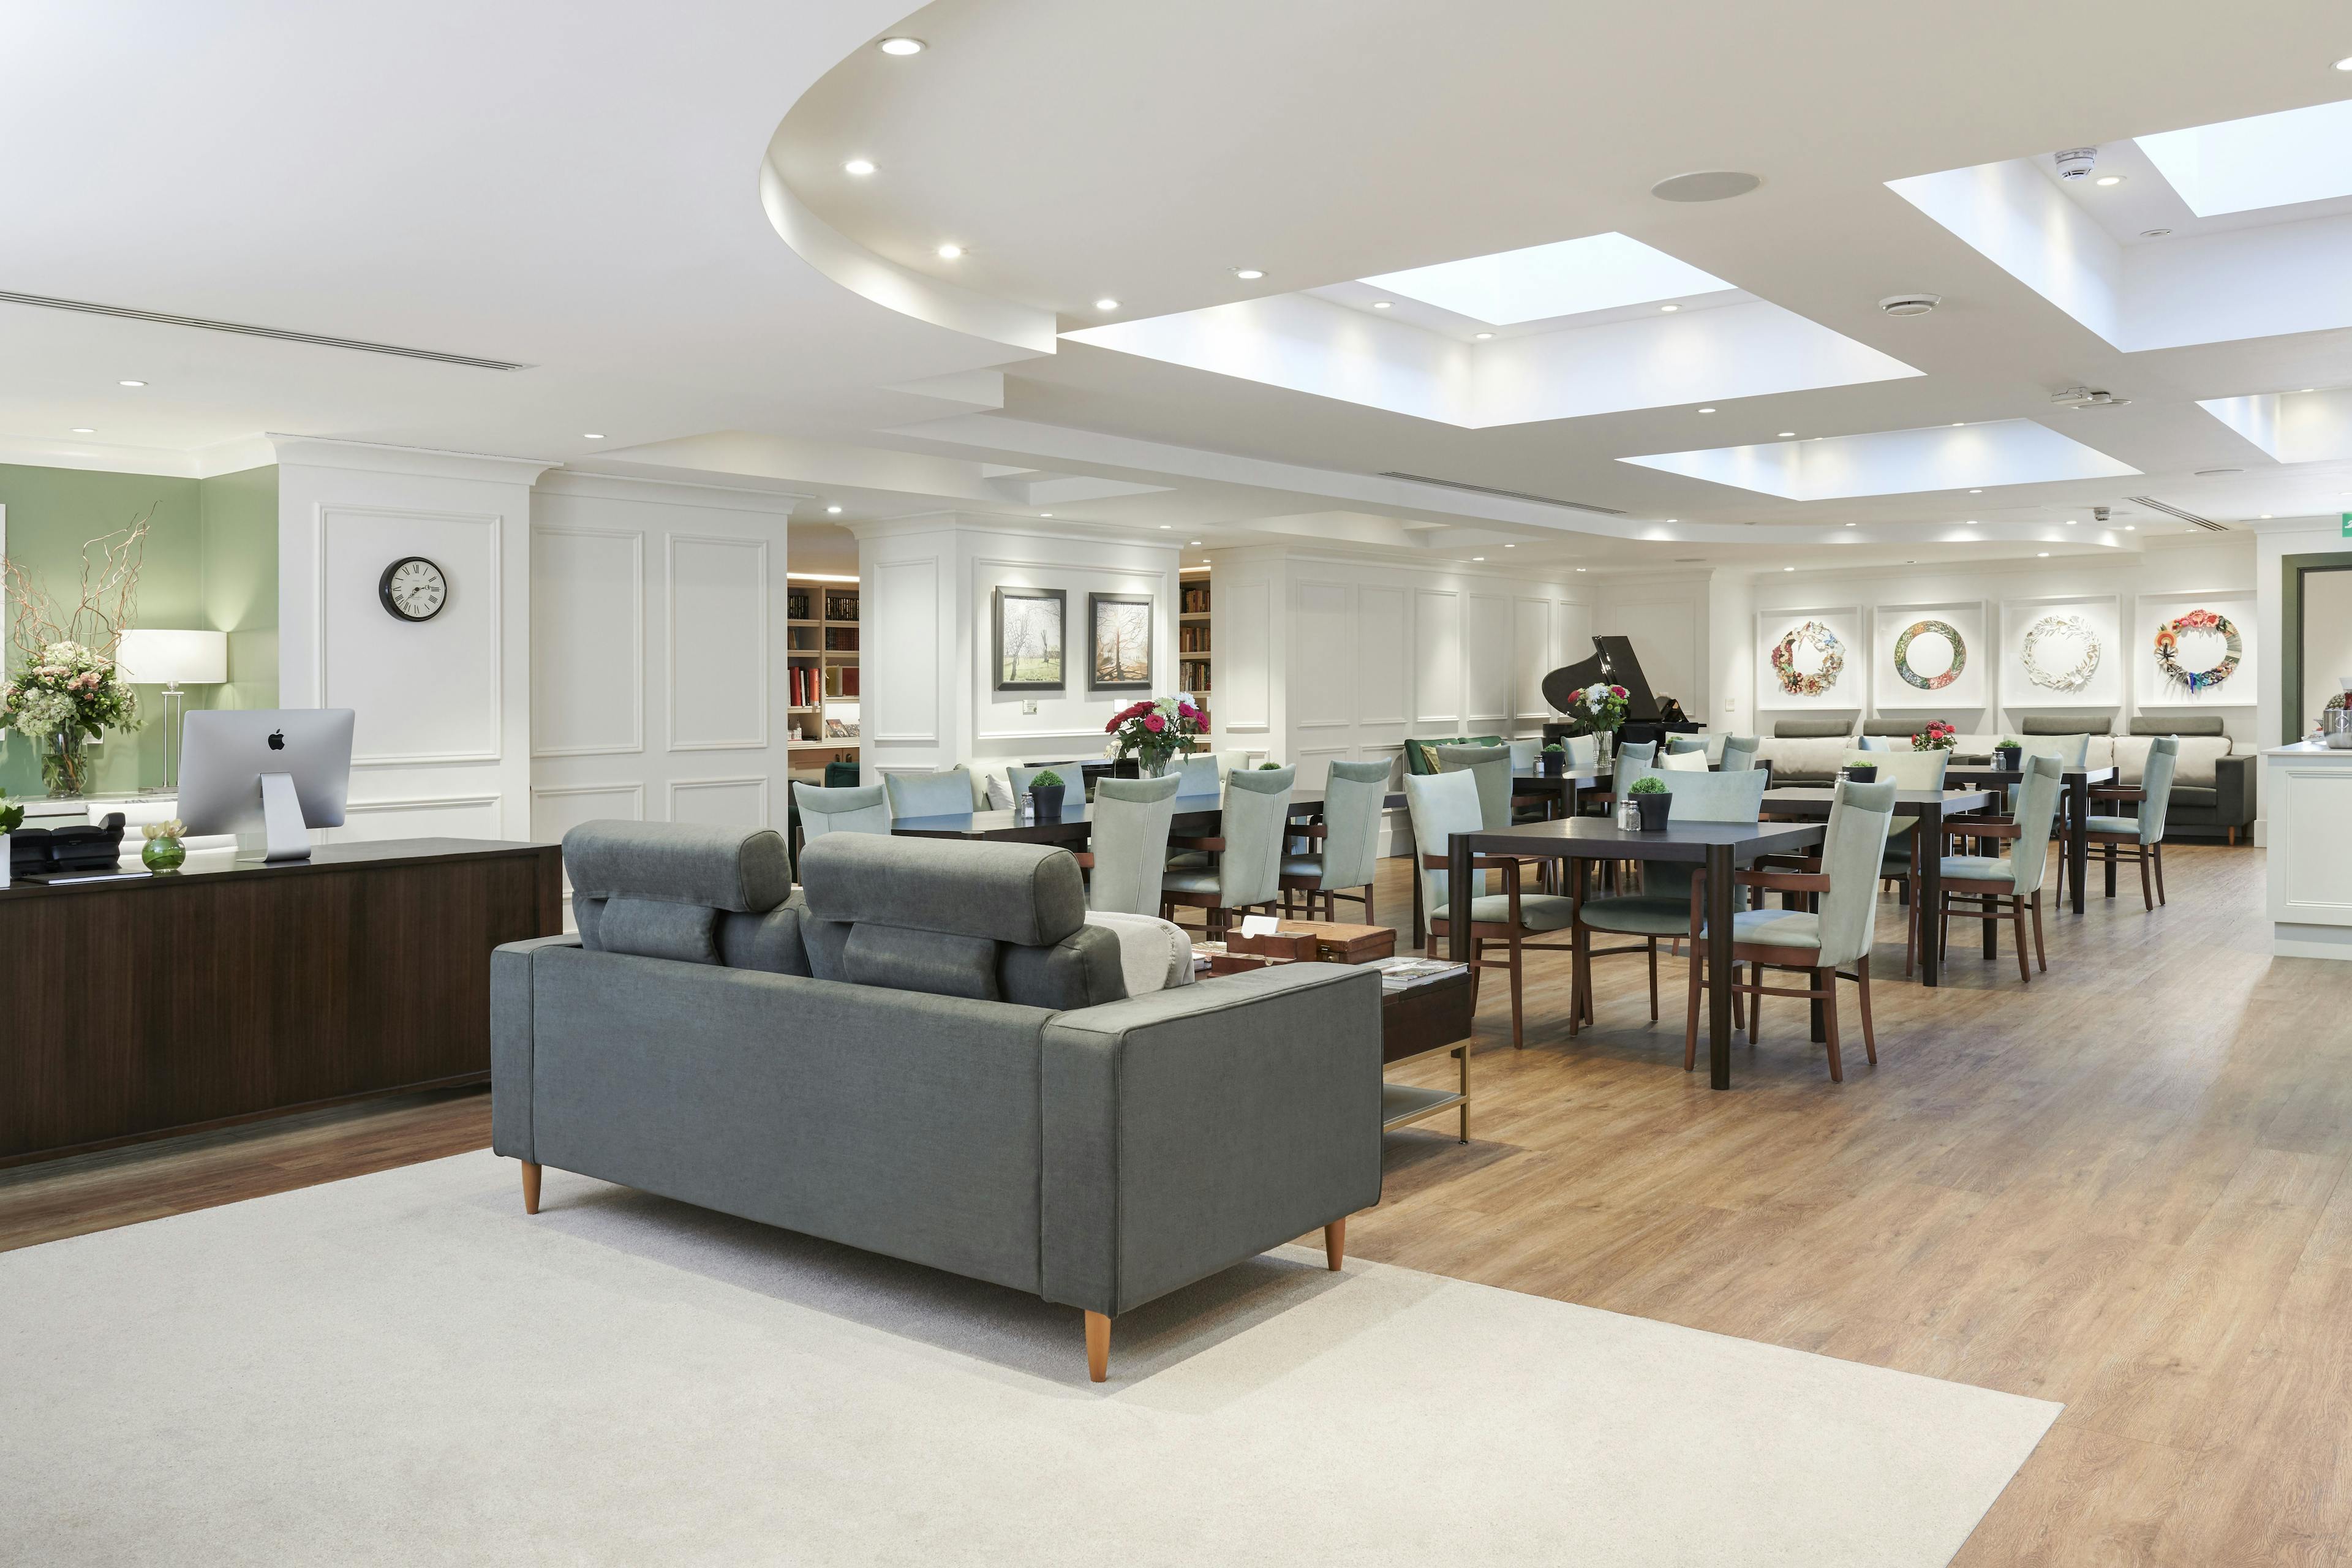 Loveday & Co - Chelsea Court Place care home 4